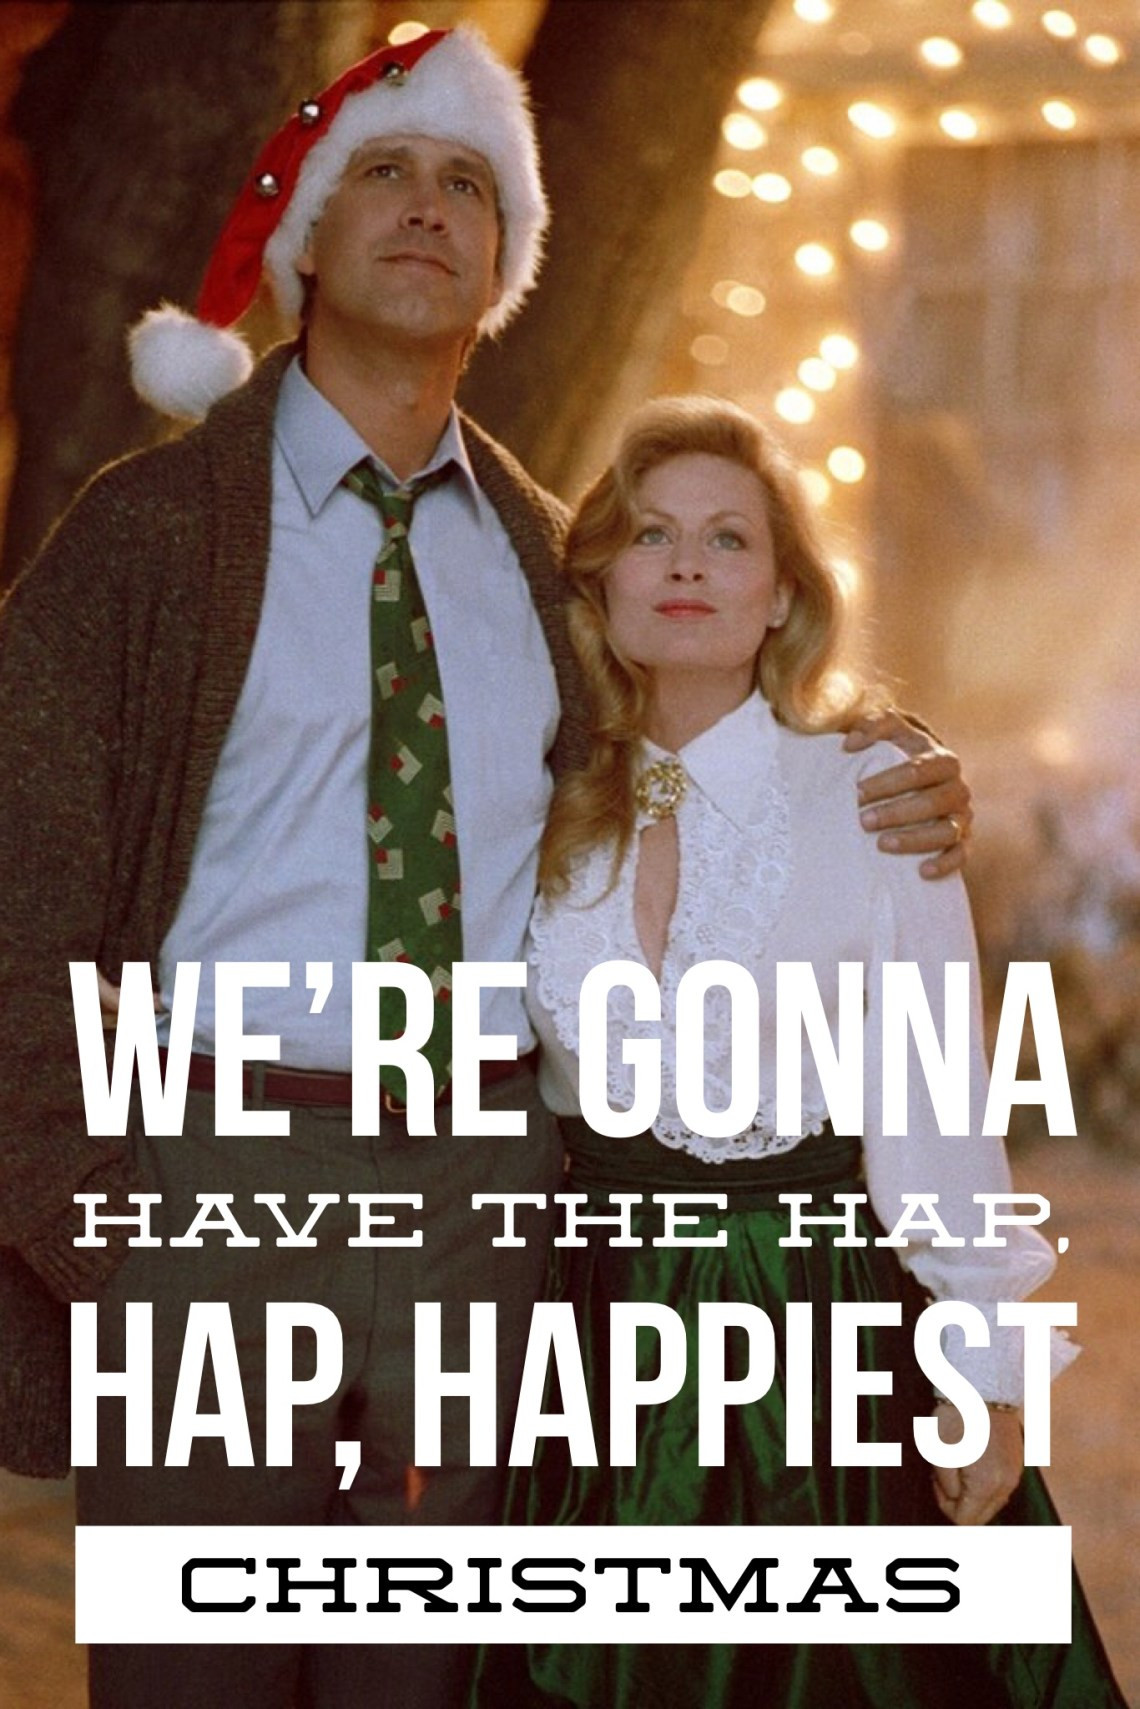 Hap Hap Happiest Christmas Quote
 Christmas Quotes from The Holiday Movies You Love